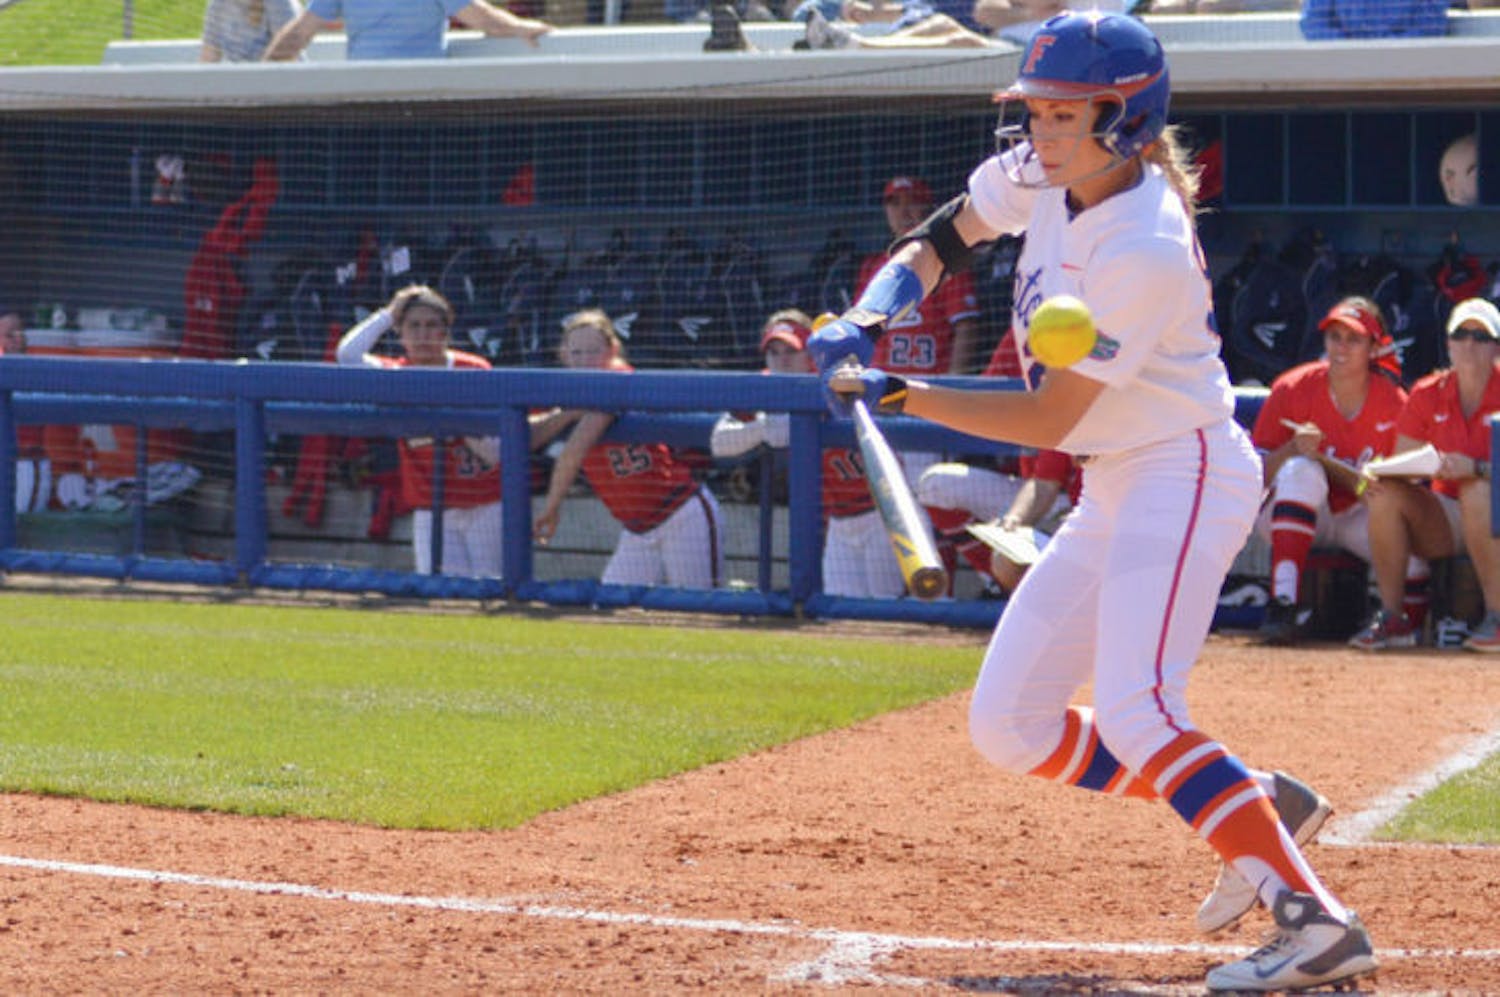 Justine McLean bats during Florida’s 2-0 win against Ole Miss on March 9 at Katie Seashole Pressly Stadium.